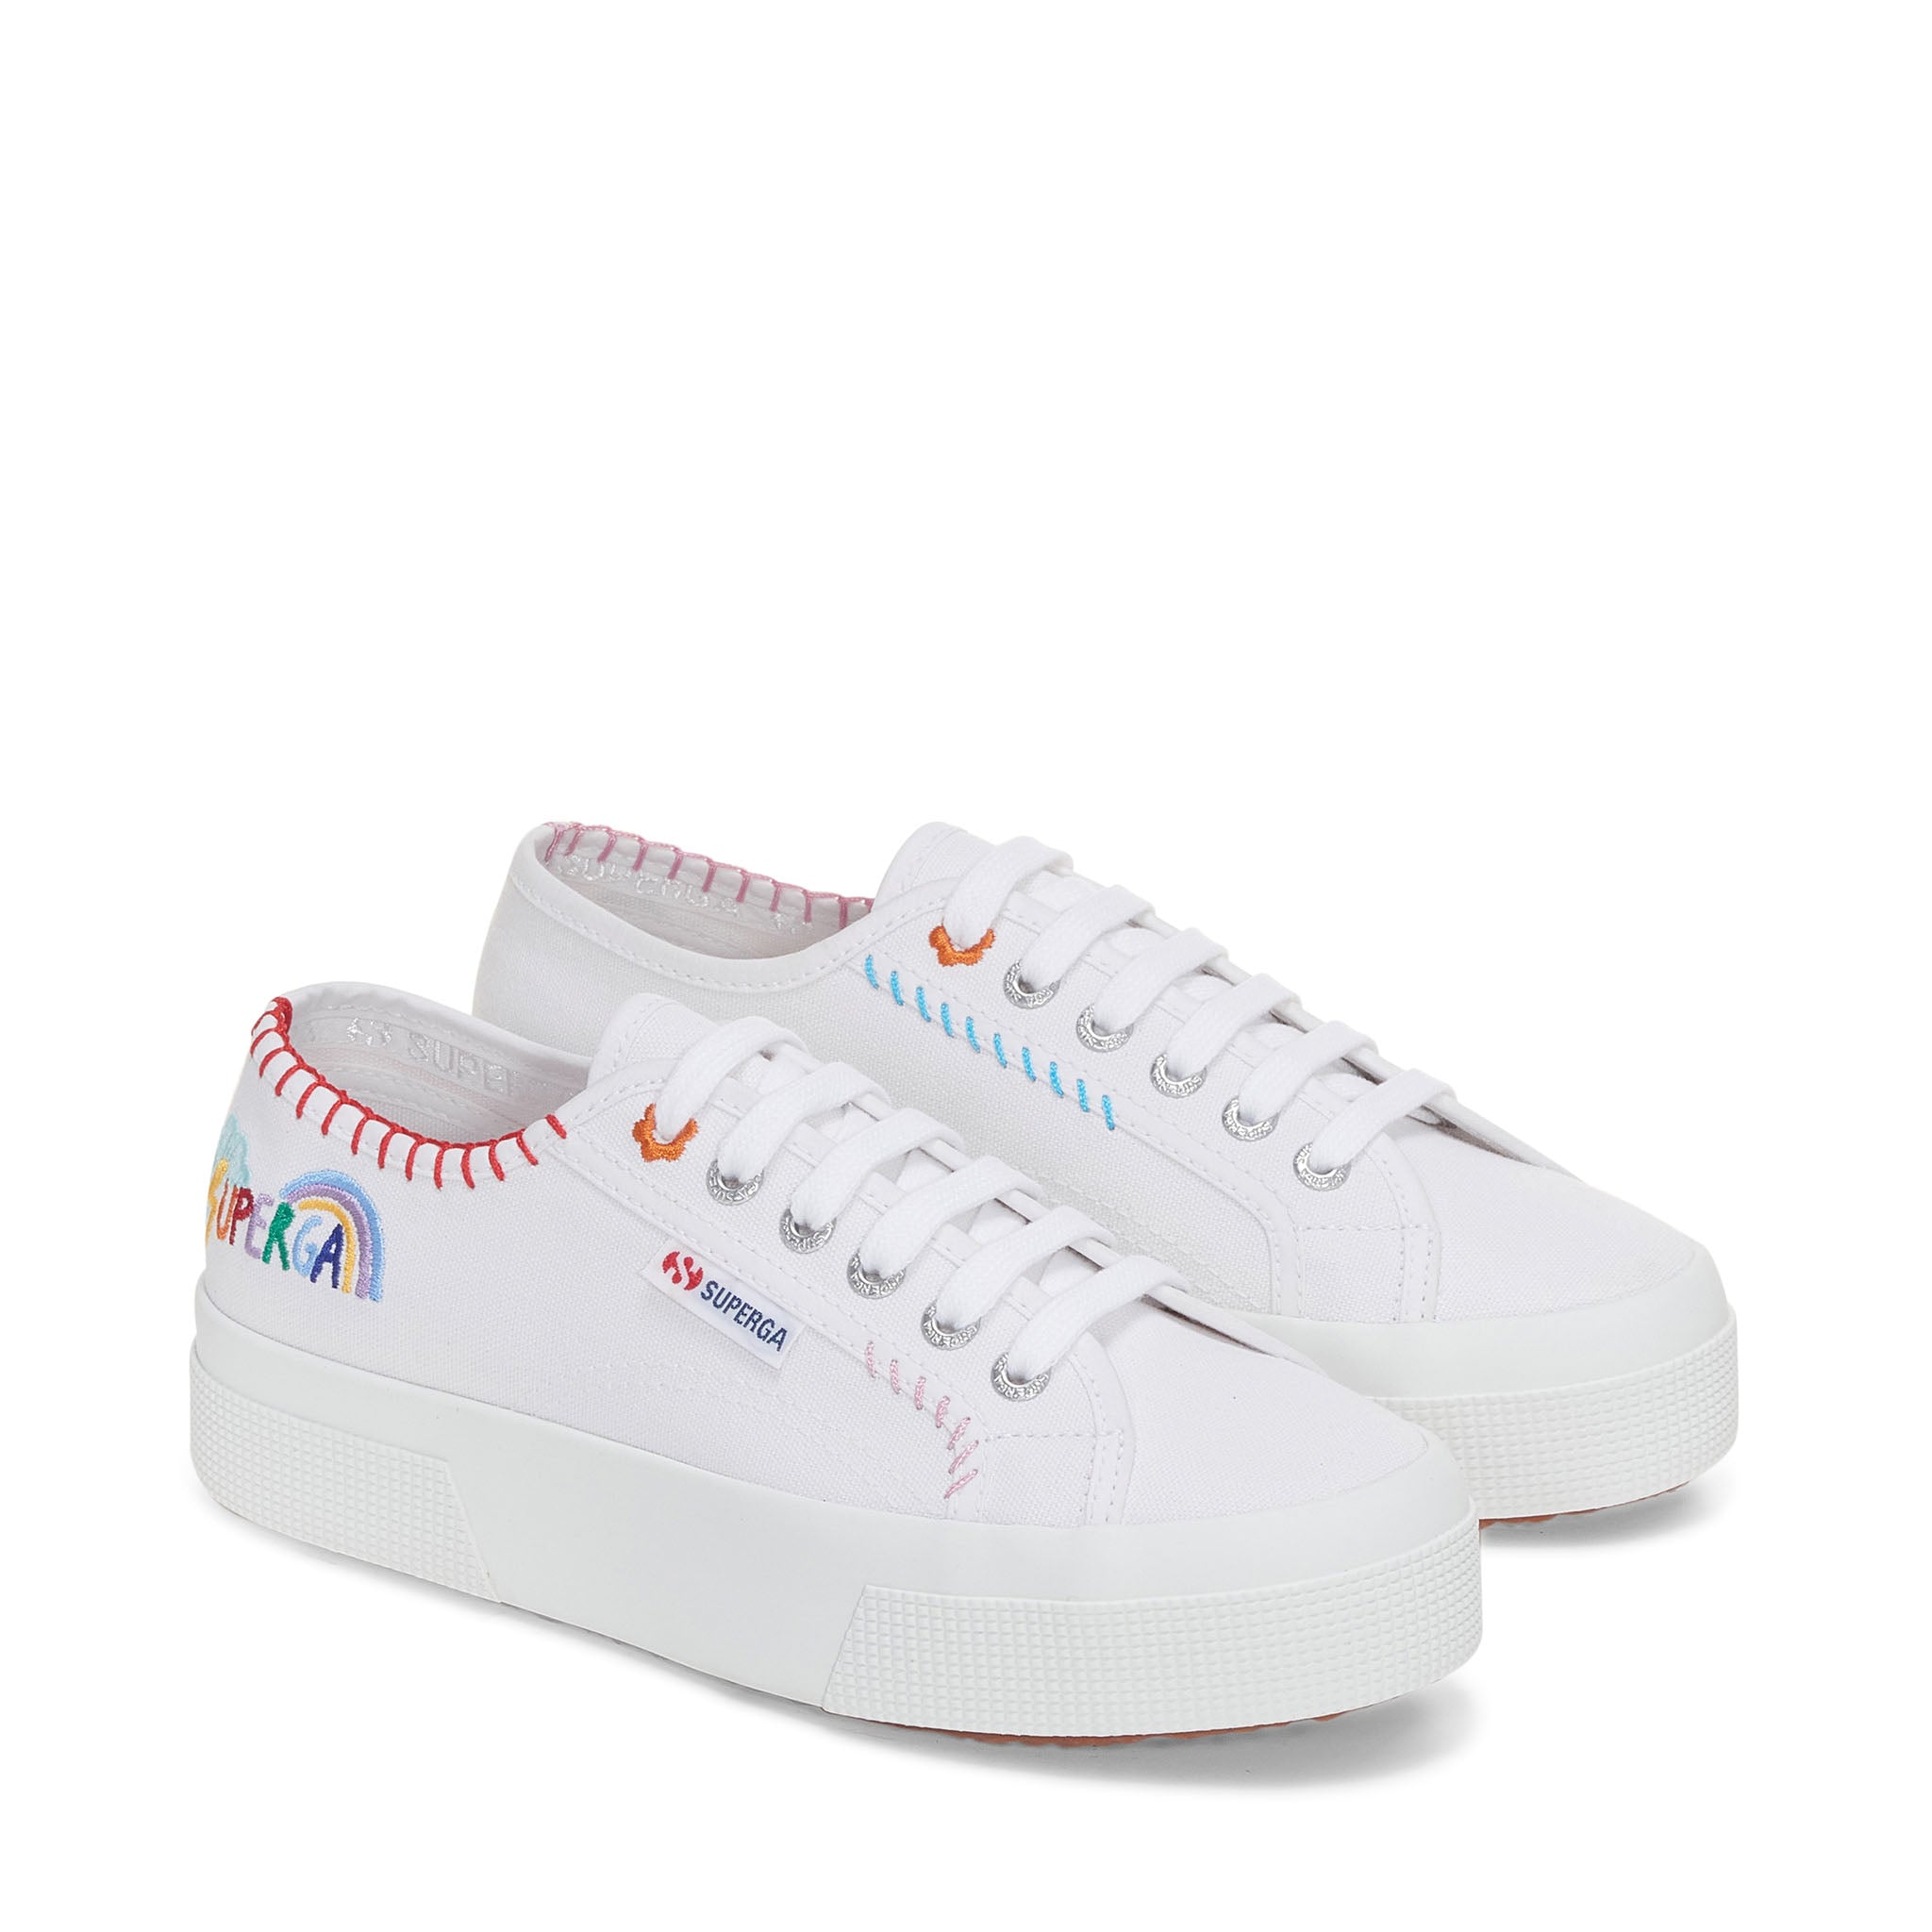 Superga 2740 Happy Logo Sneakers - White Multicolor Embroidery Logo. Front view.